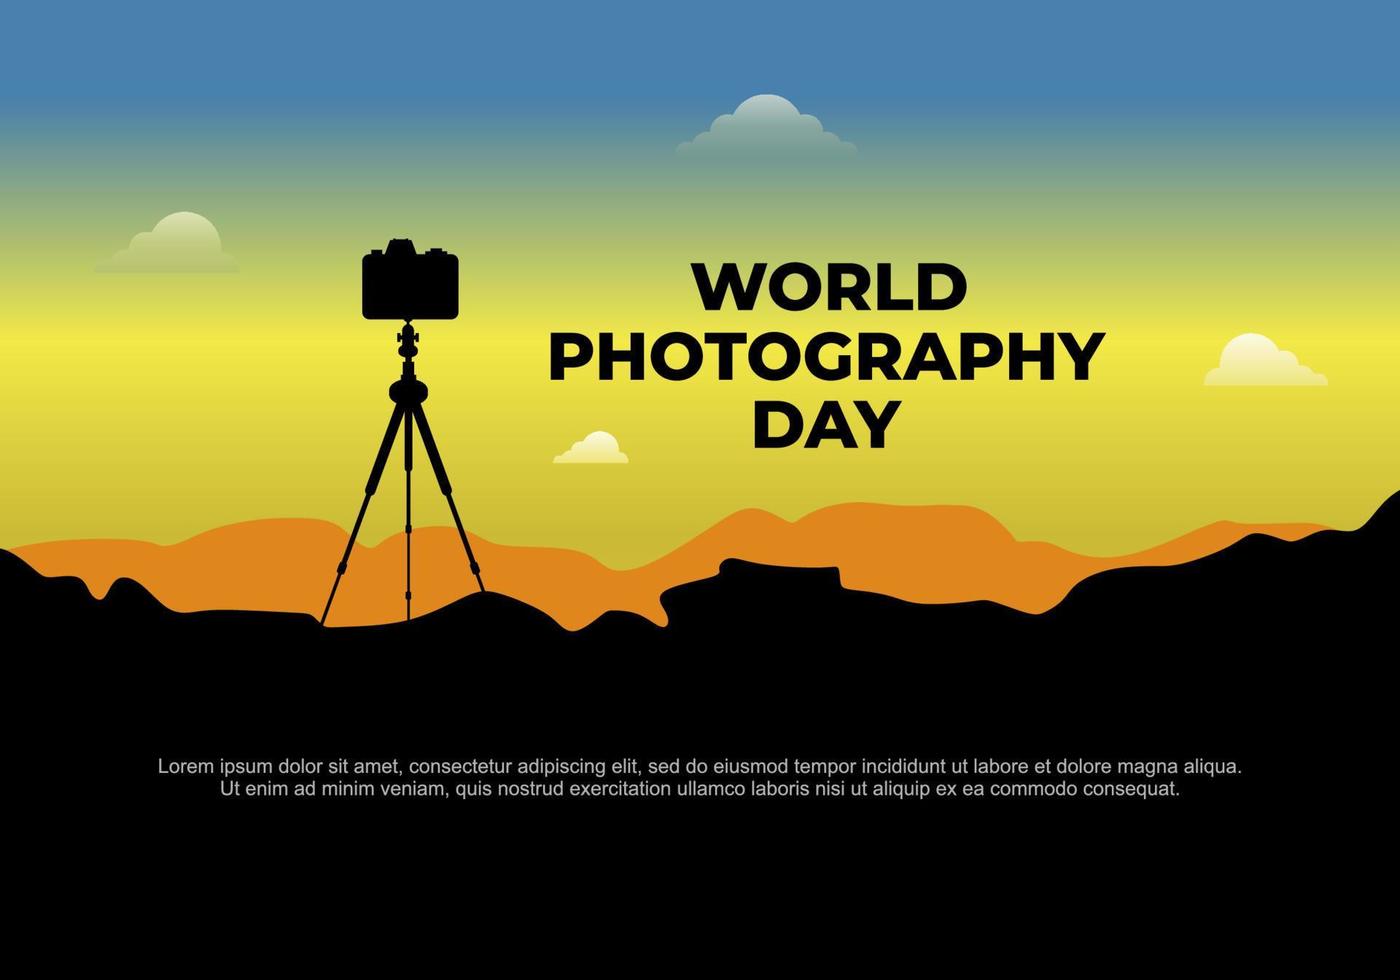 World photography day banner poster on august 19 with tripod camera on sunset background. vector